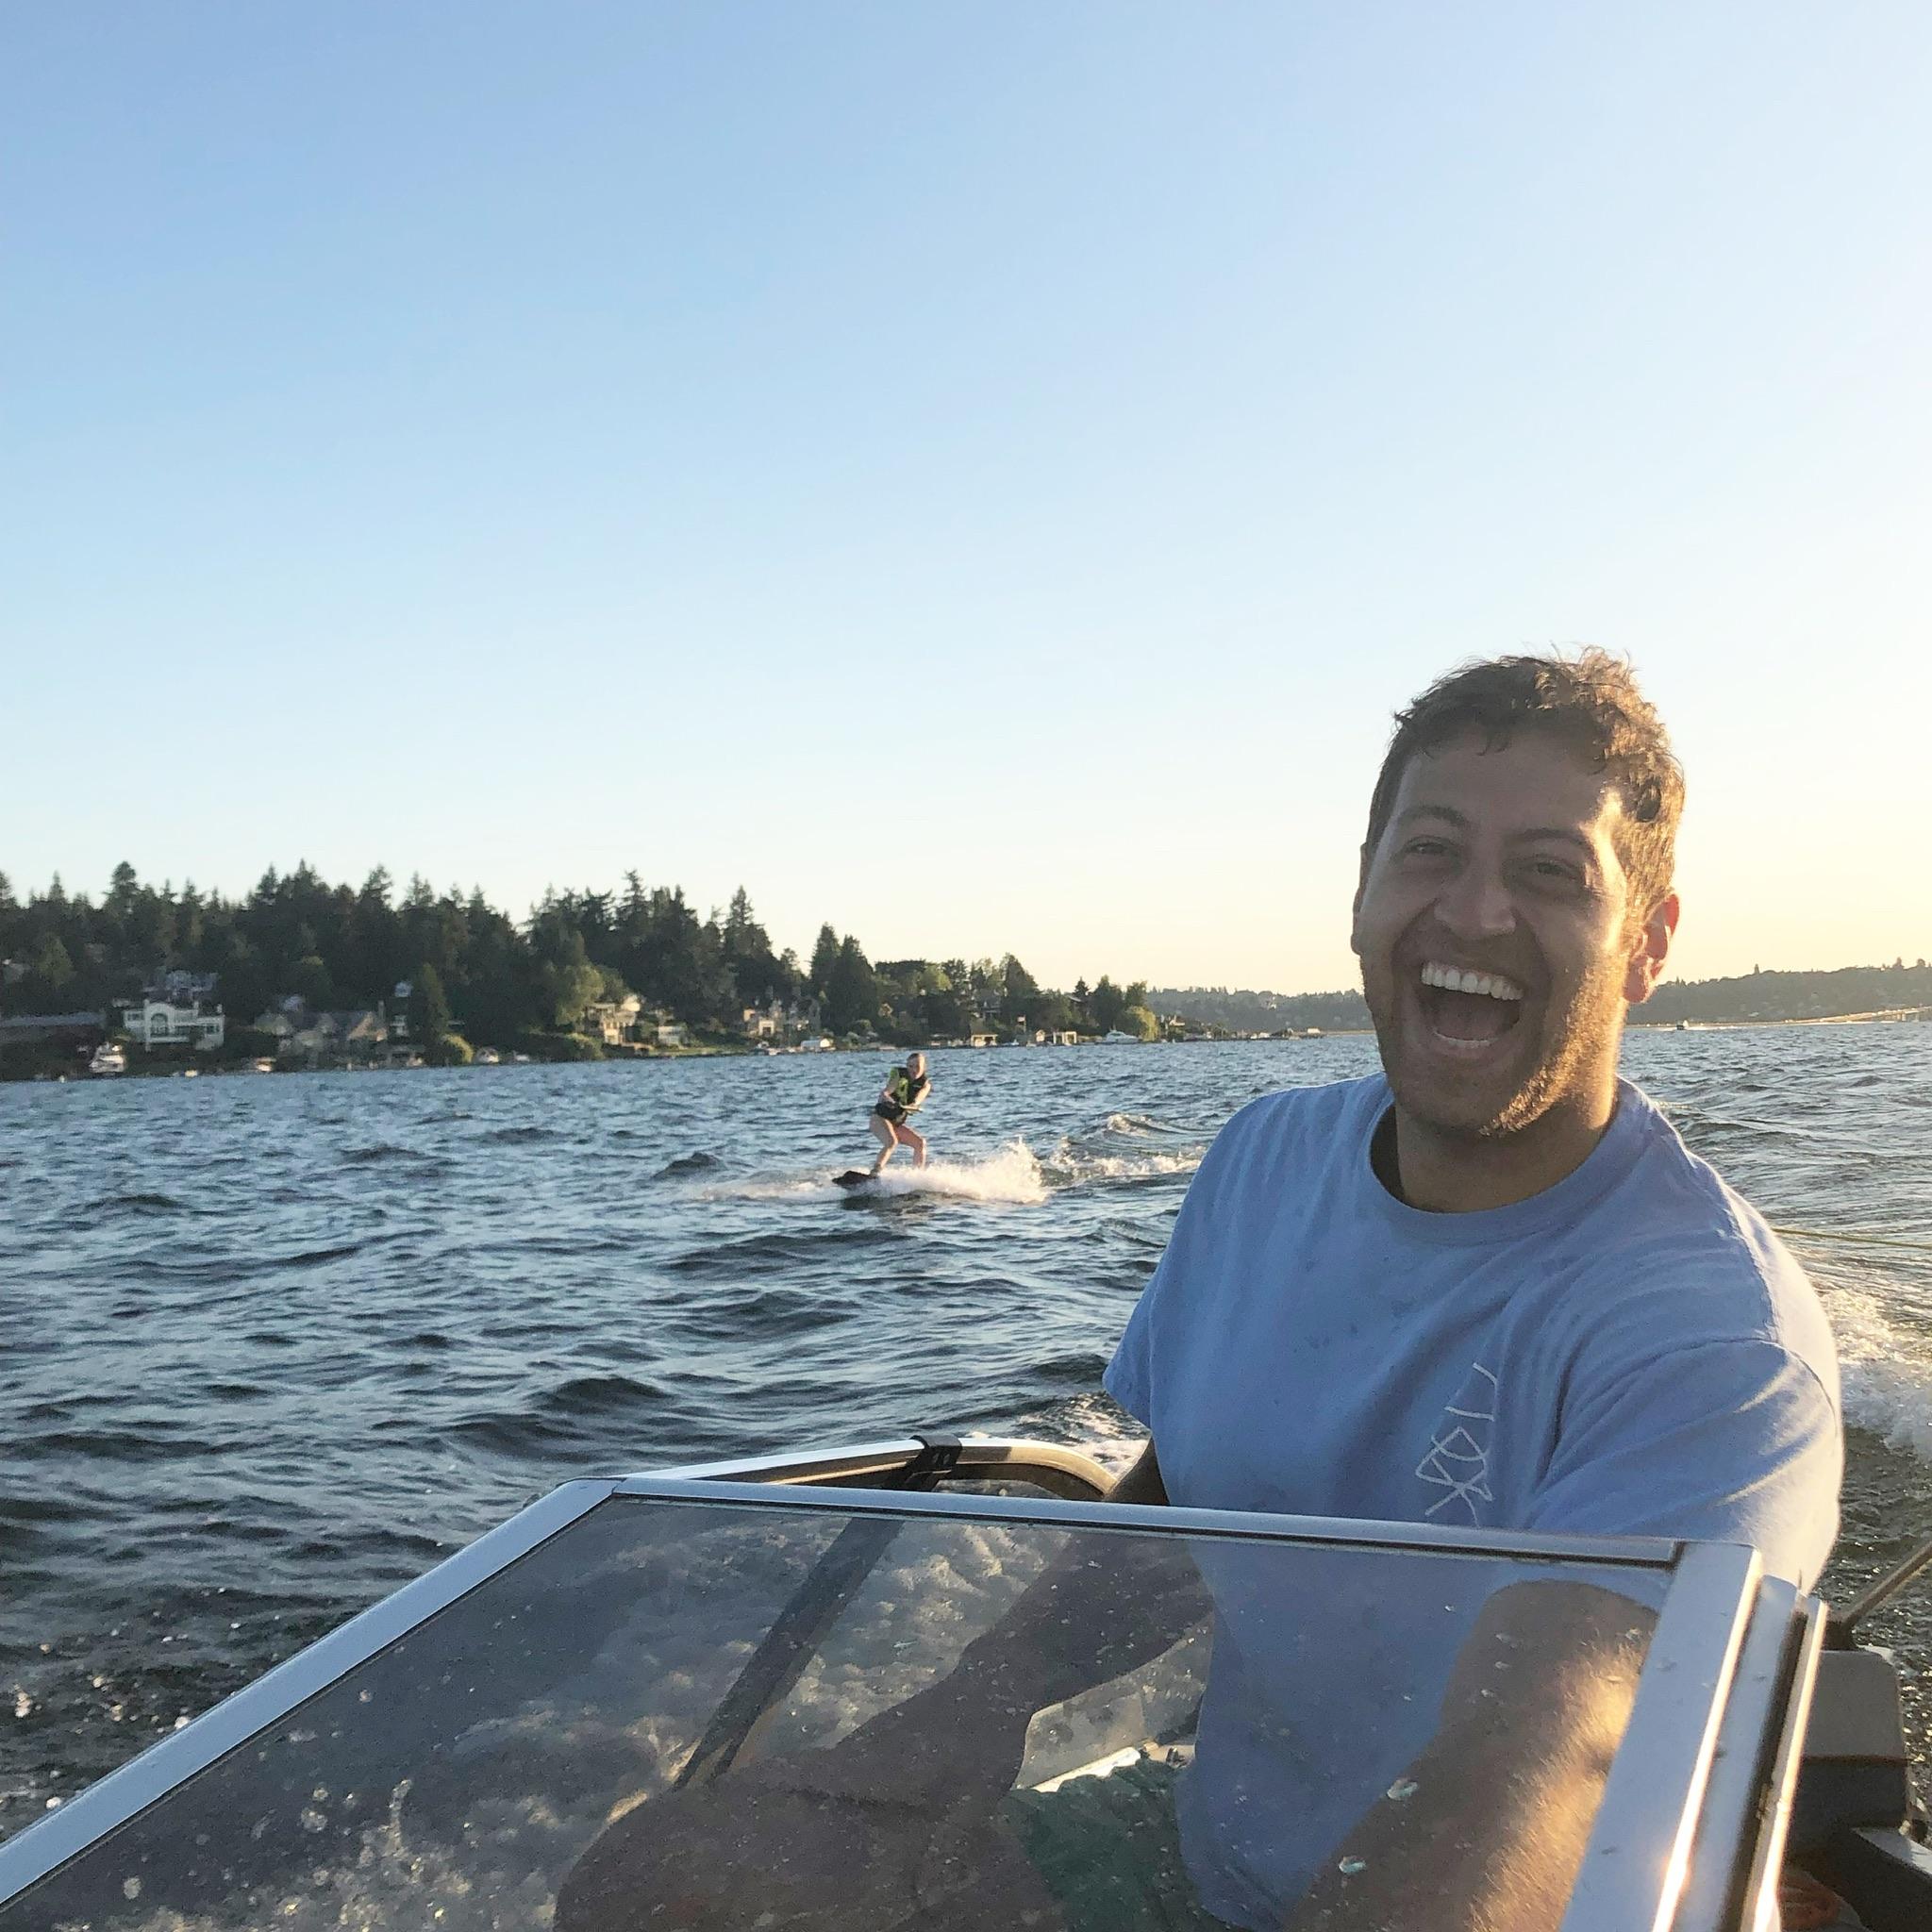 Paying homage to the Portage Bay Protégé (and Kira's first time wakeboarding!)